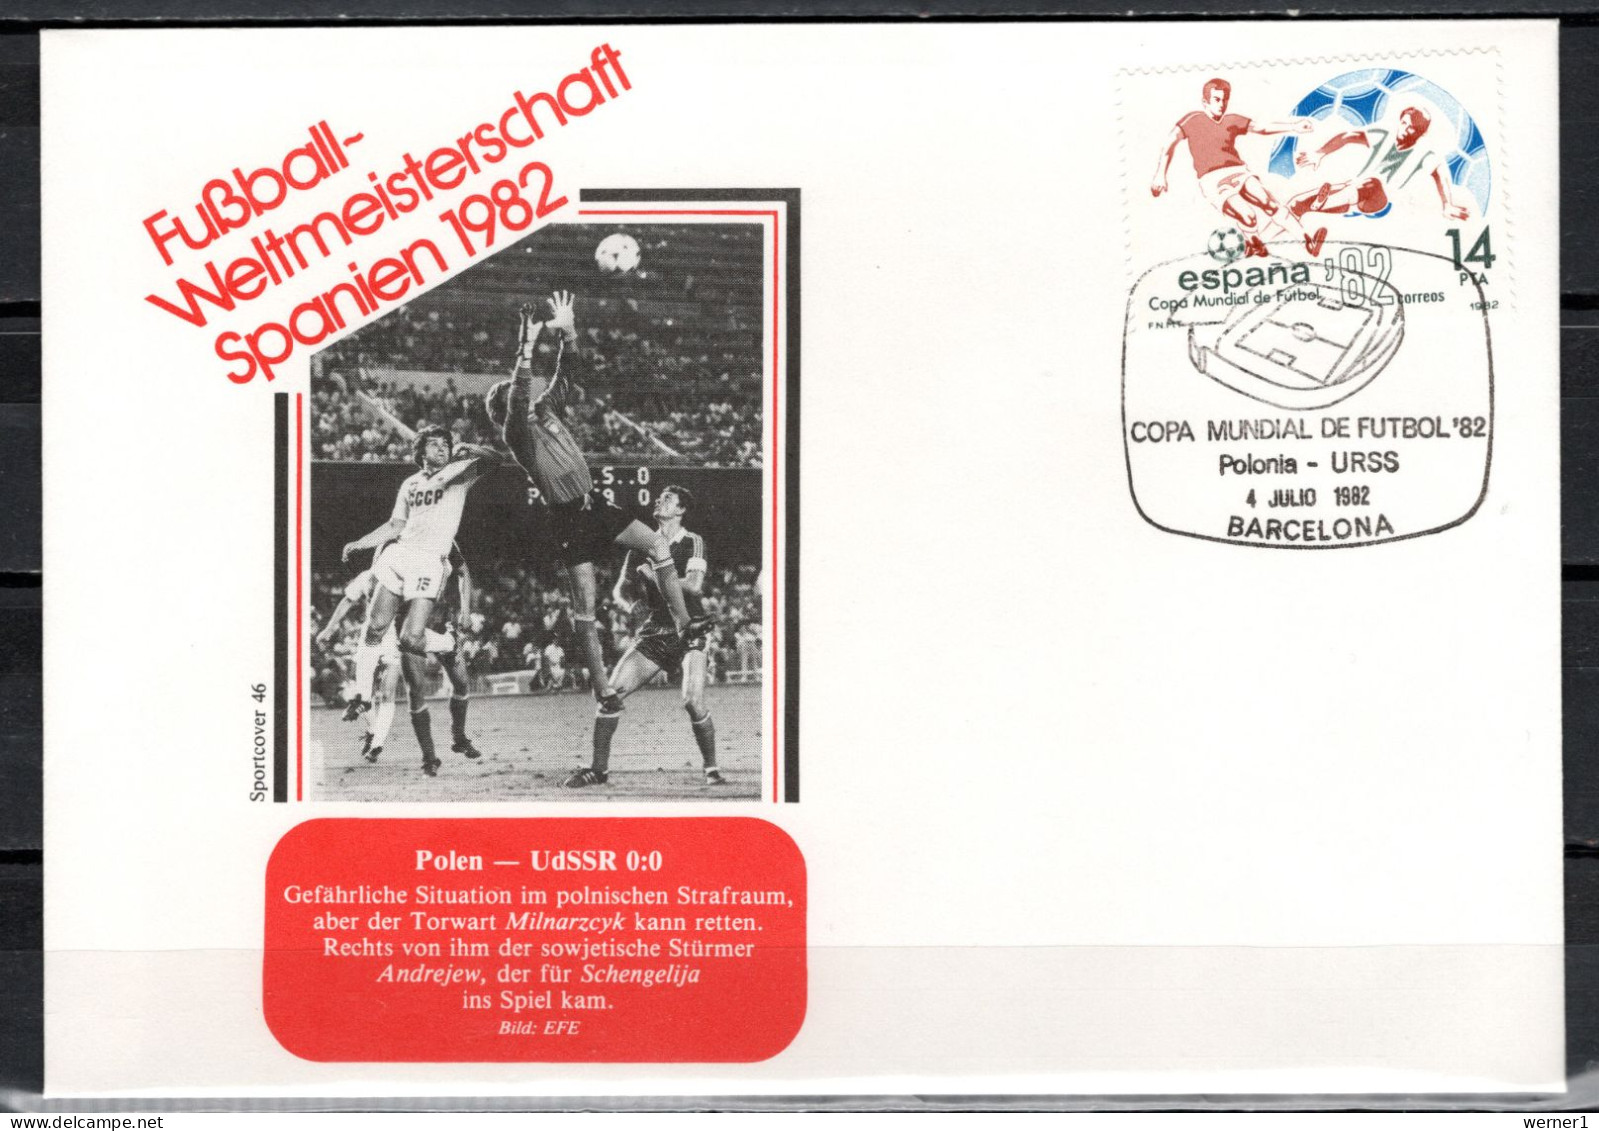 Spain 1982 Football Soccer World Cup Commemorative Cover Match Poland - USSR 0:0 - 1982 – Espagne